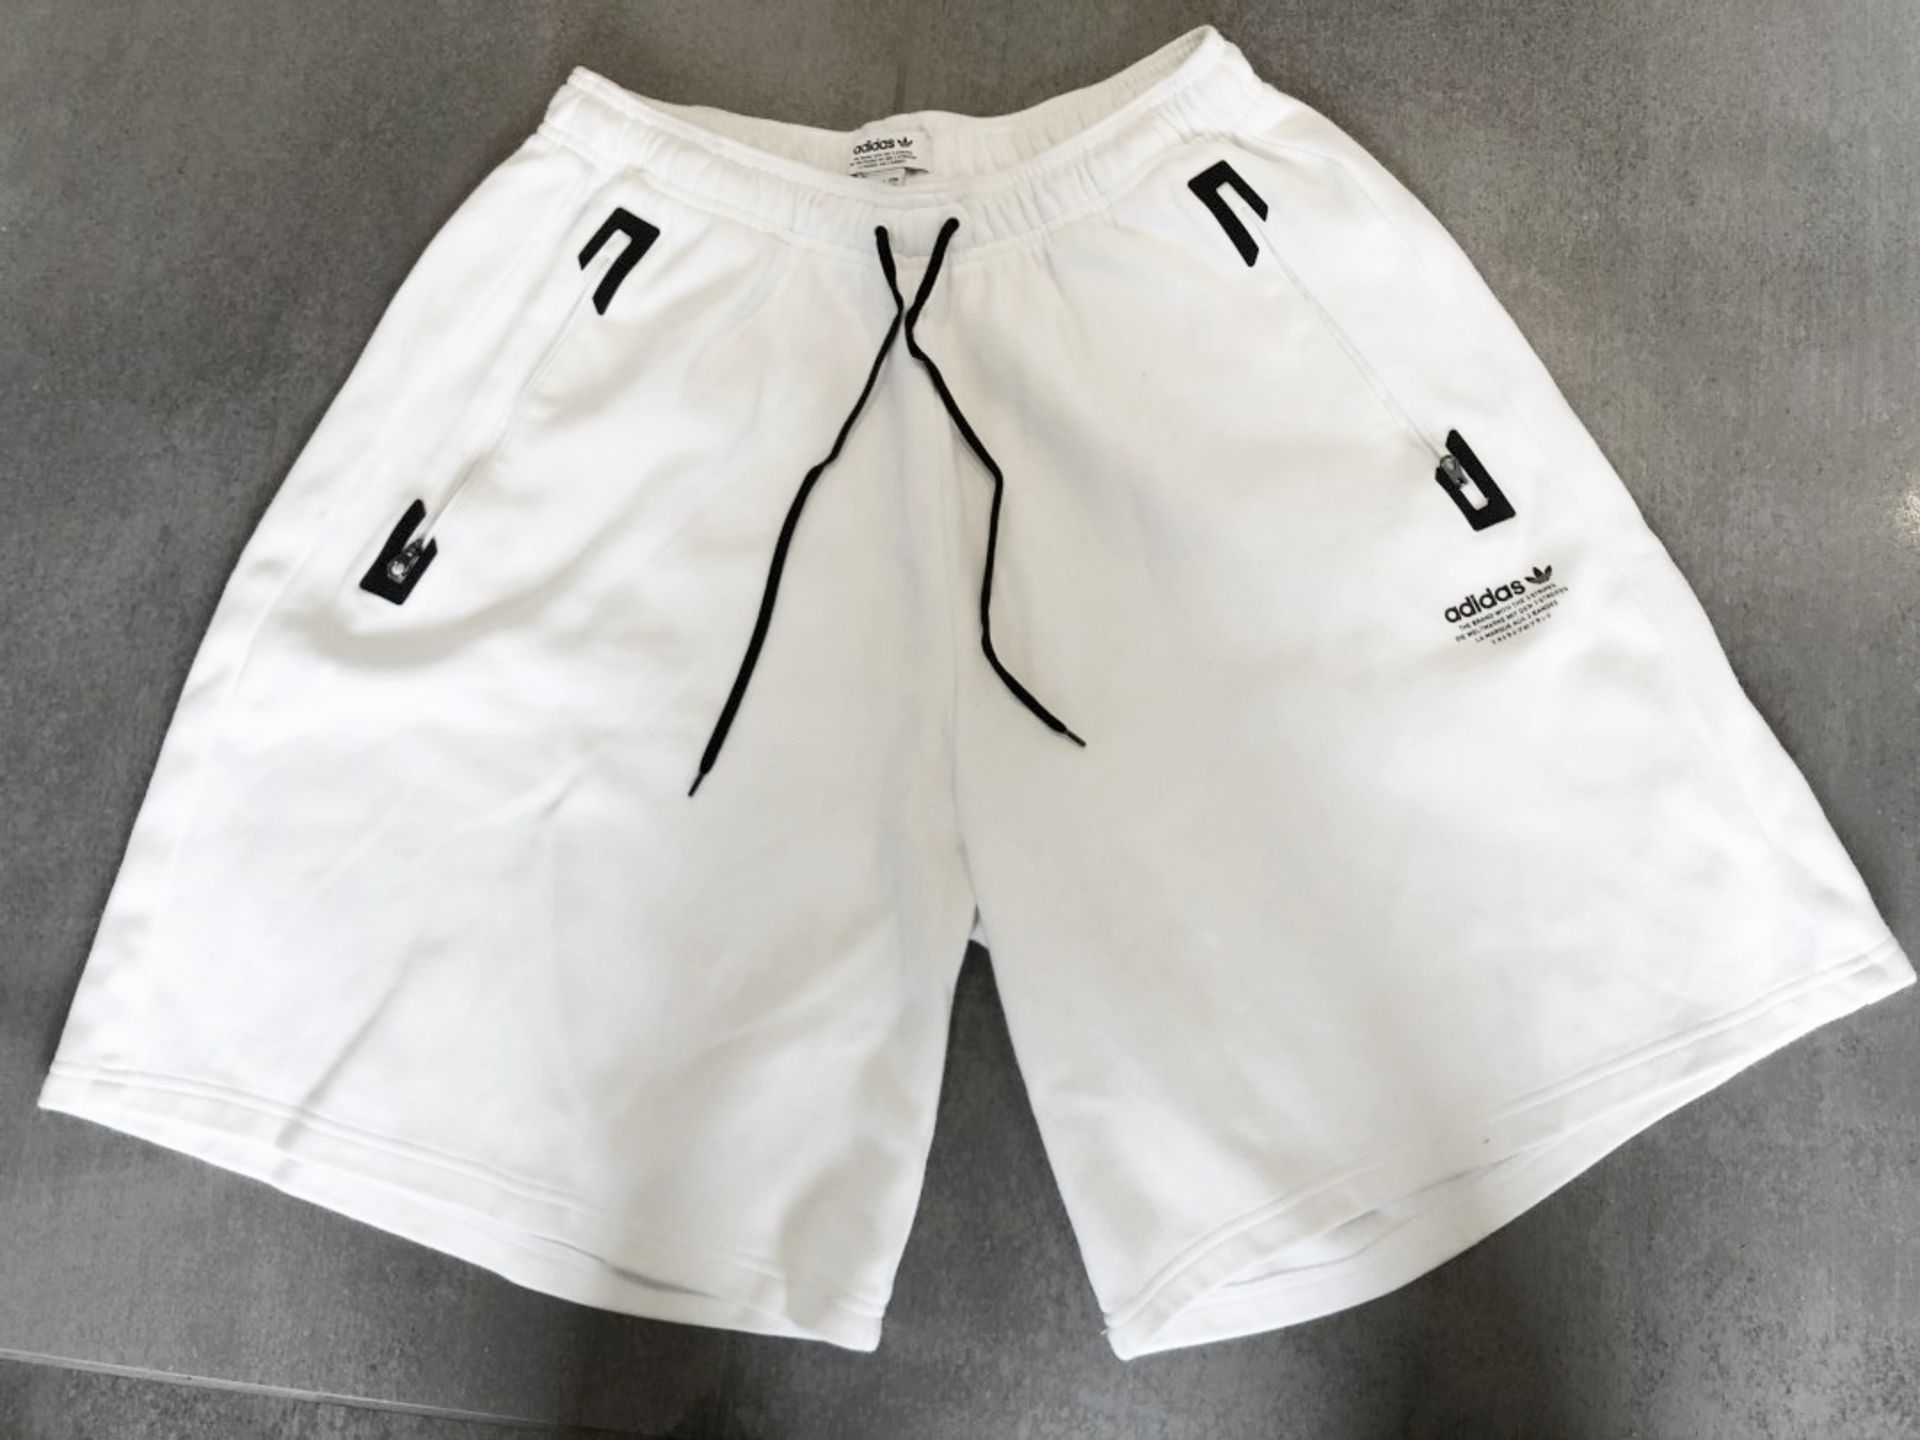 1 x Pair Of Men's Genuine Adidas Shorts In White - Size (EU/UK): L/L - Preowned - Ref: JS126 - NO - Image 2 of 9